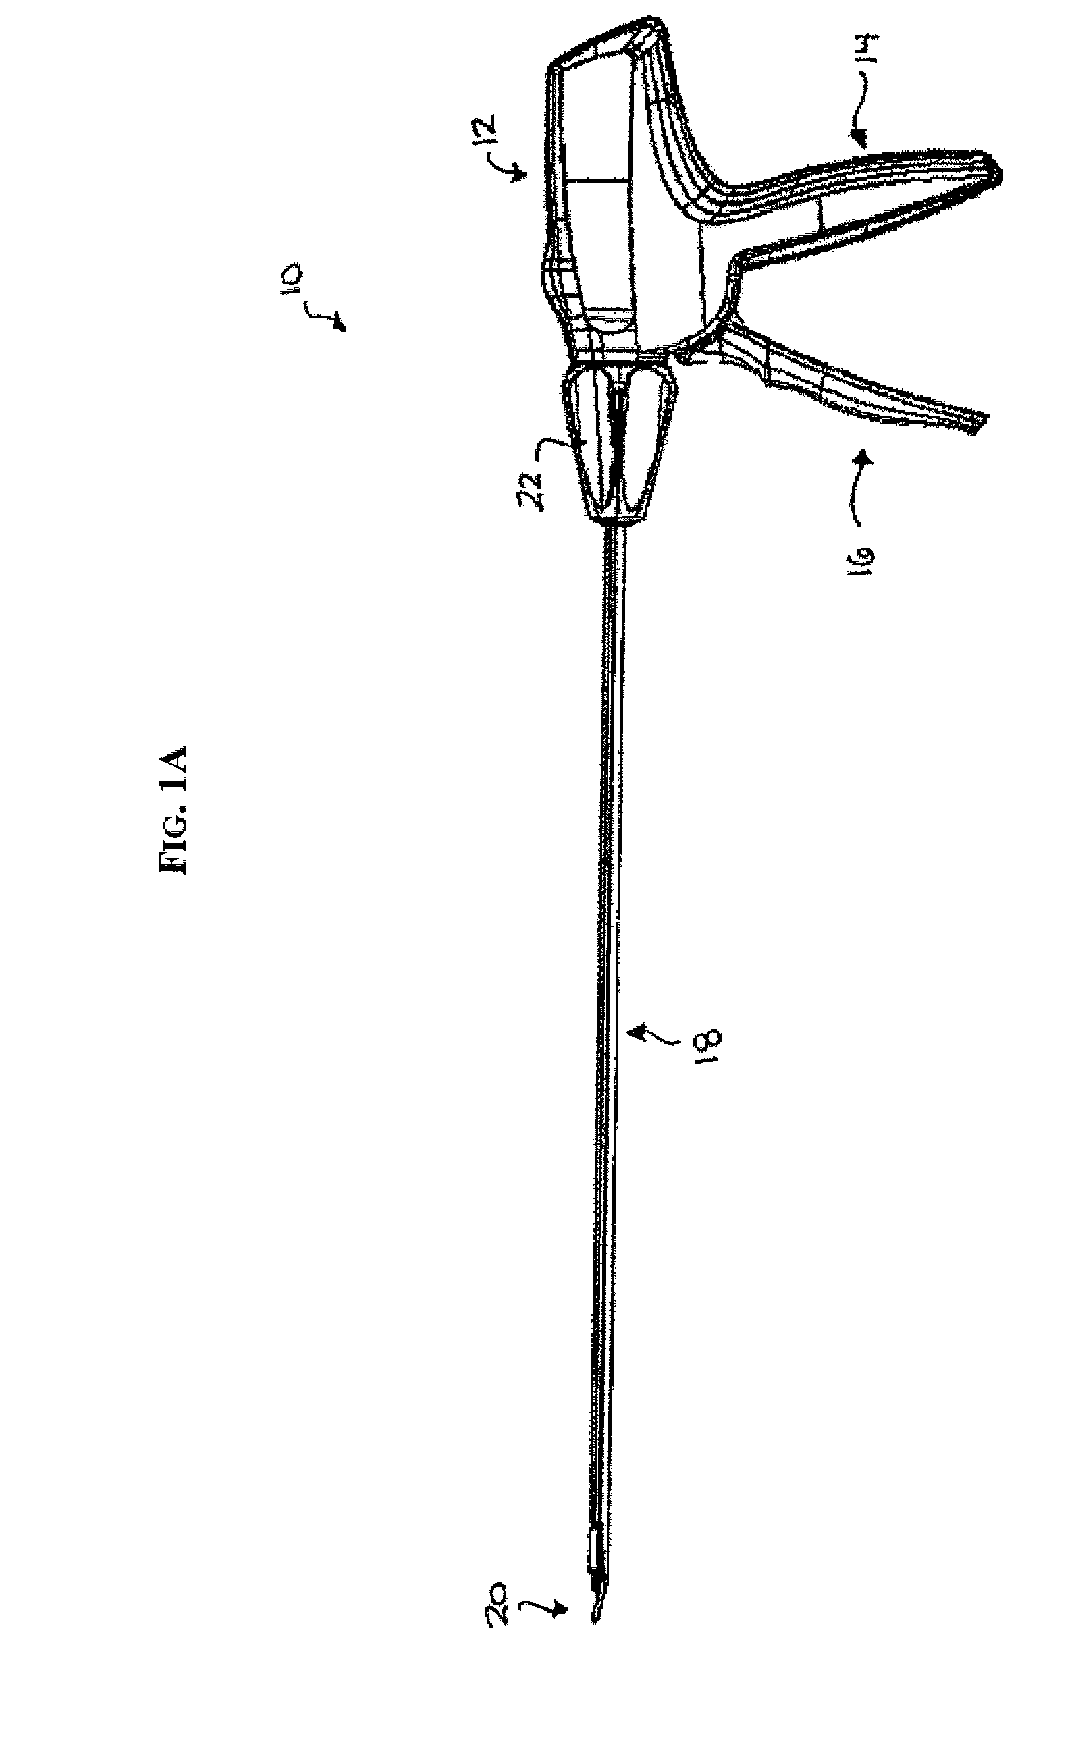 Surgical clip advancement and alignment mechanism